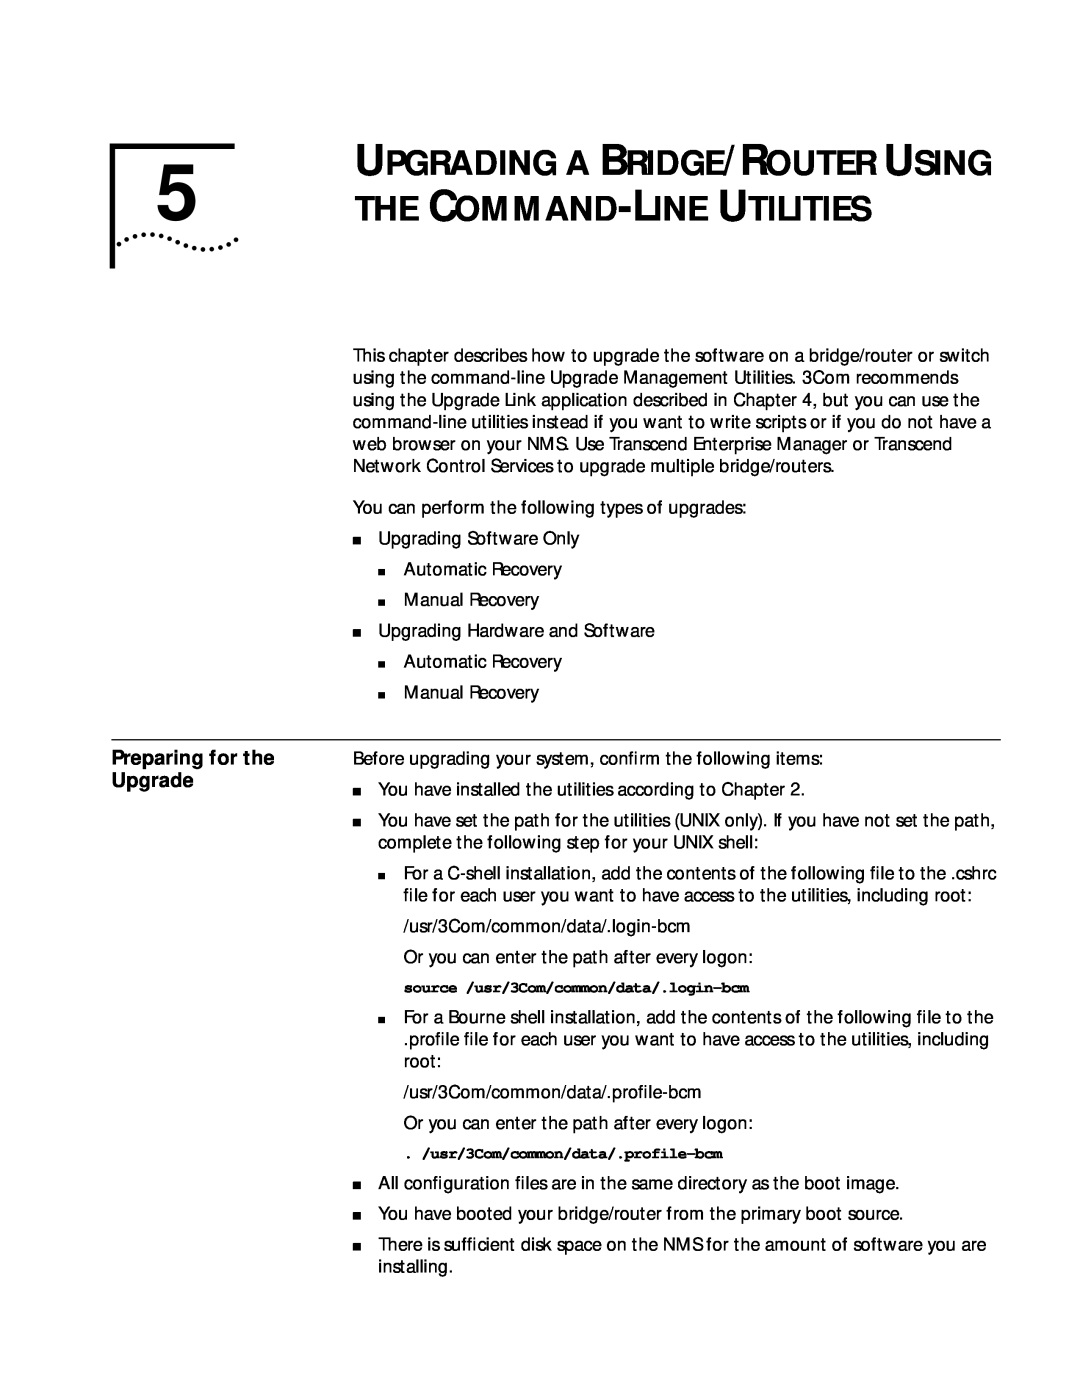 3Com ENTERPRISE OS 11.3 manual The Command-Line Utilities, Upgrading A Bridge/Router Using, Preparing for the Upgrade 